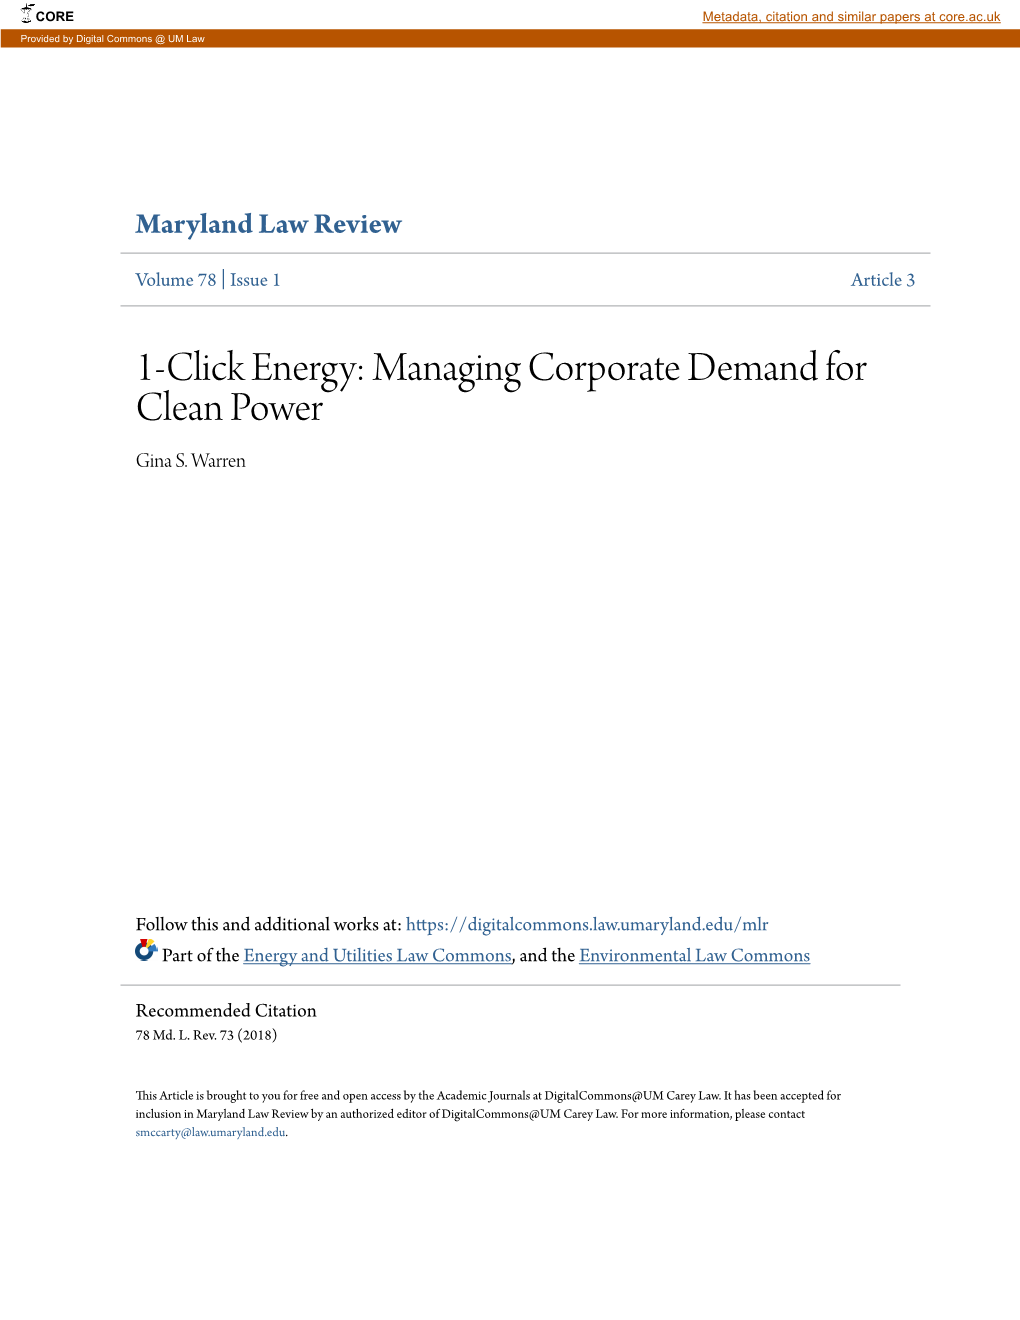 1-Click Energy: Managing Corporate Demand for Clean Power Gina S